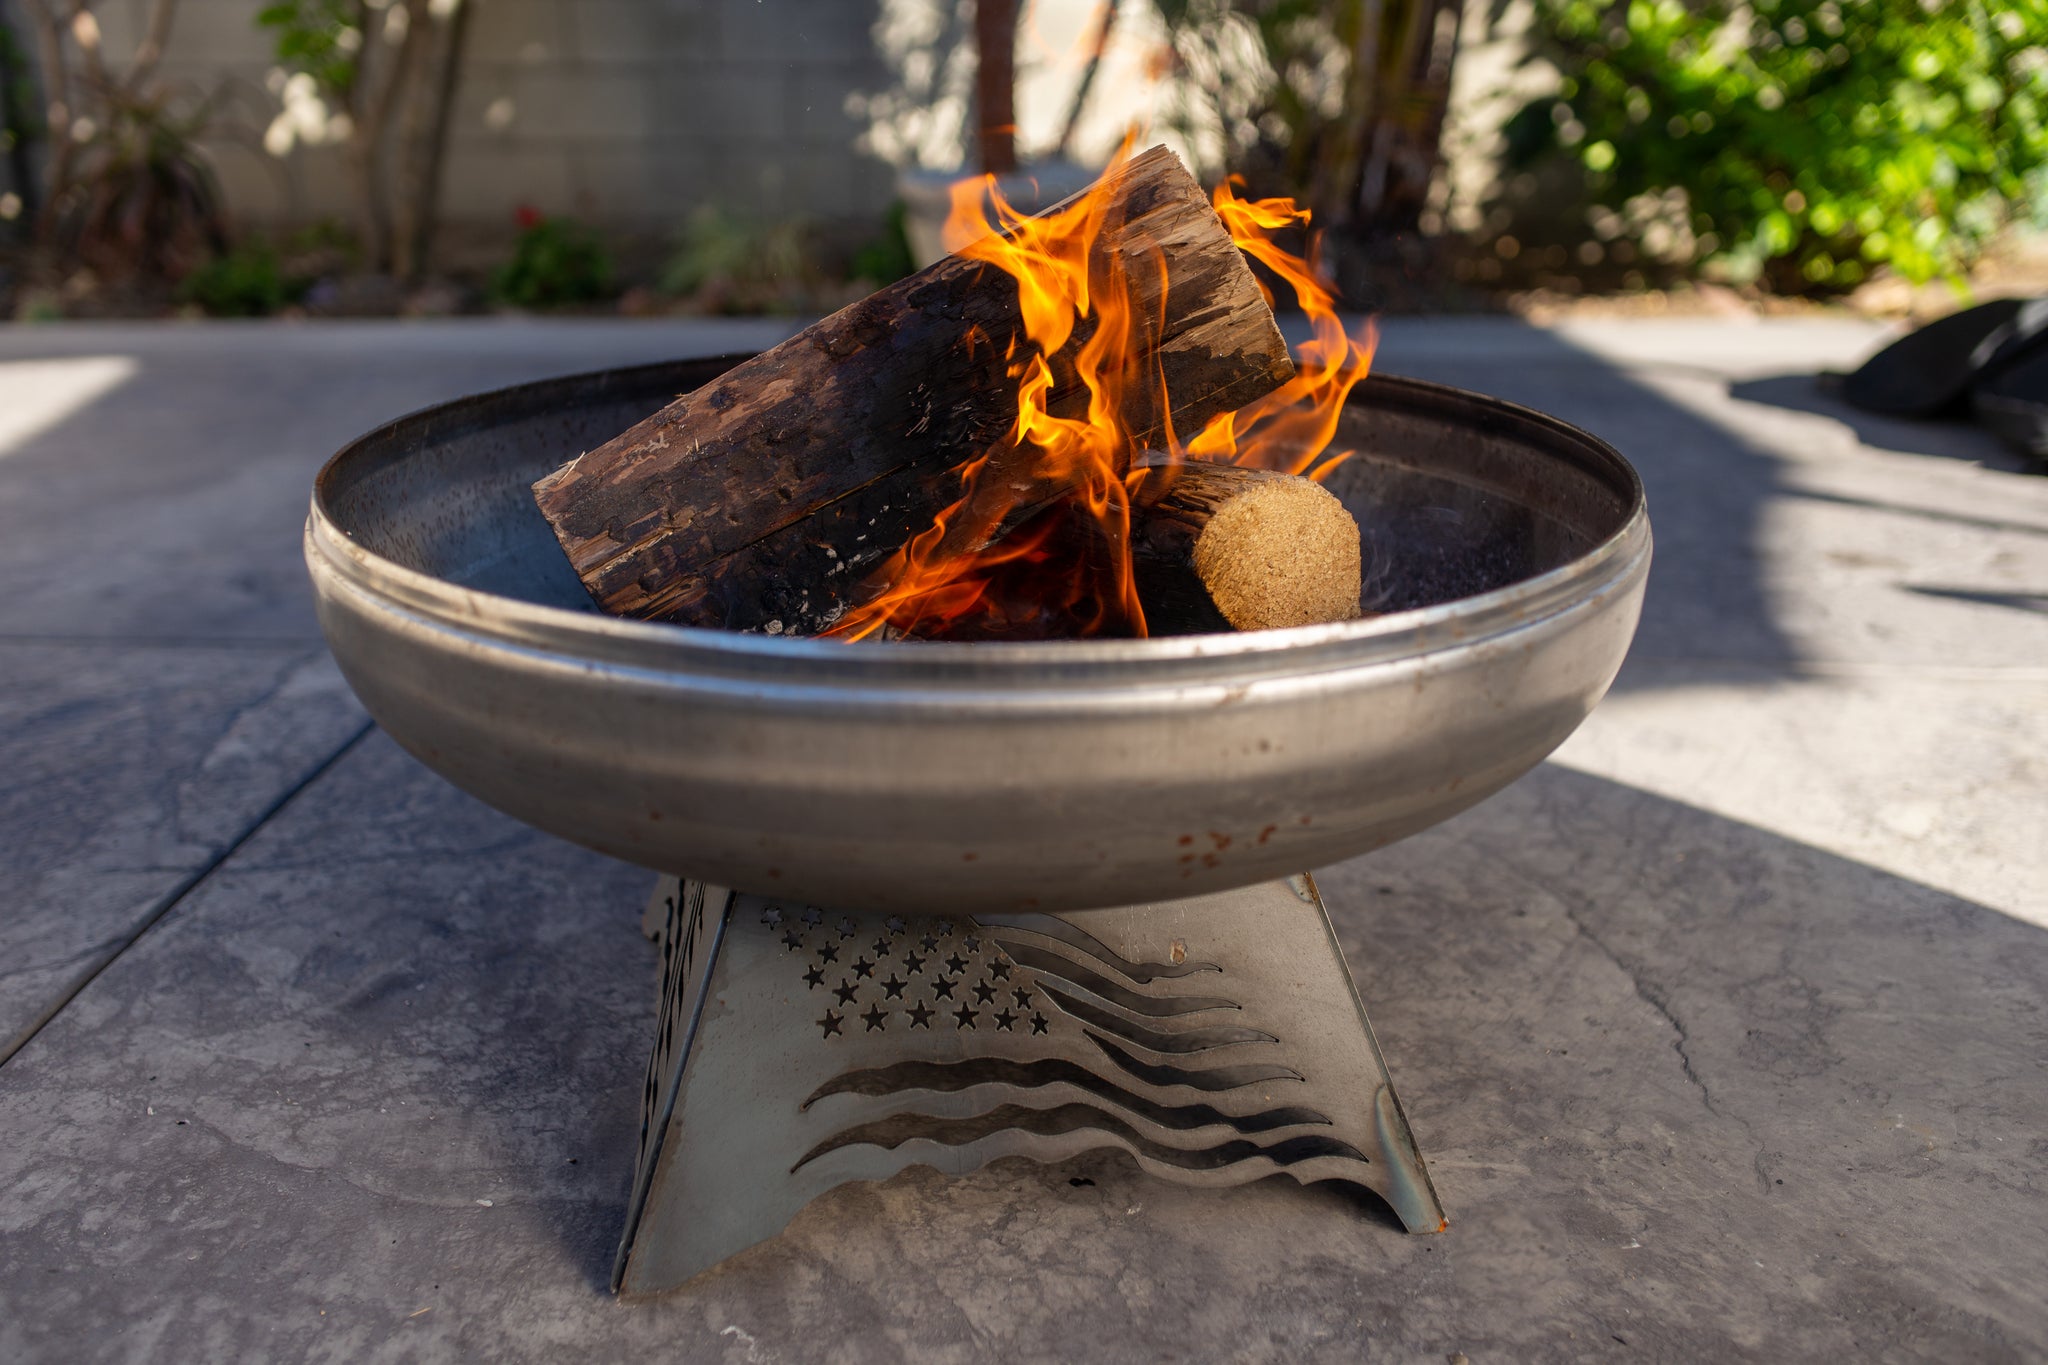 Our fire pit made by placing a large cast iron pot (with drainage